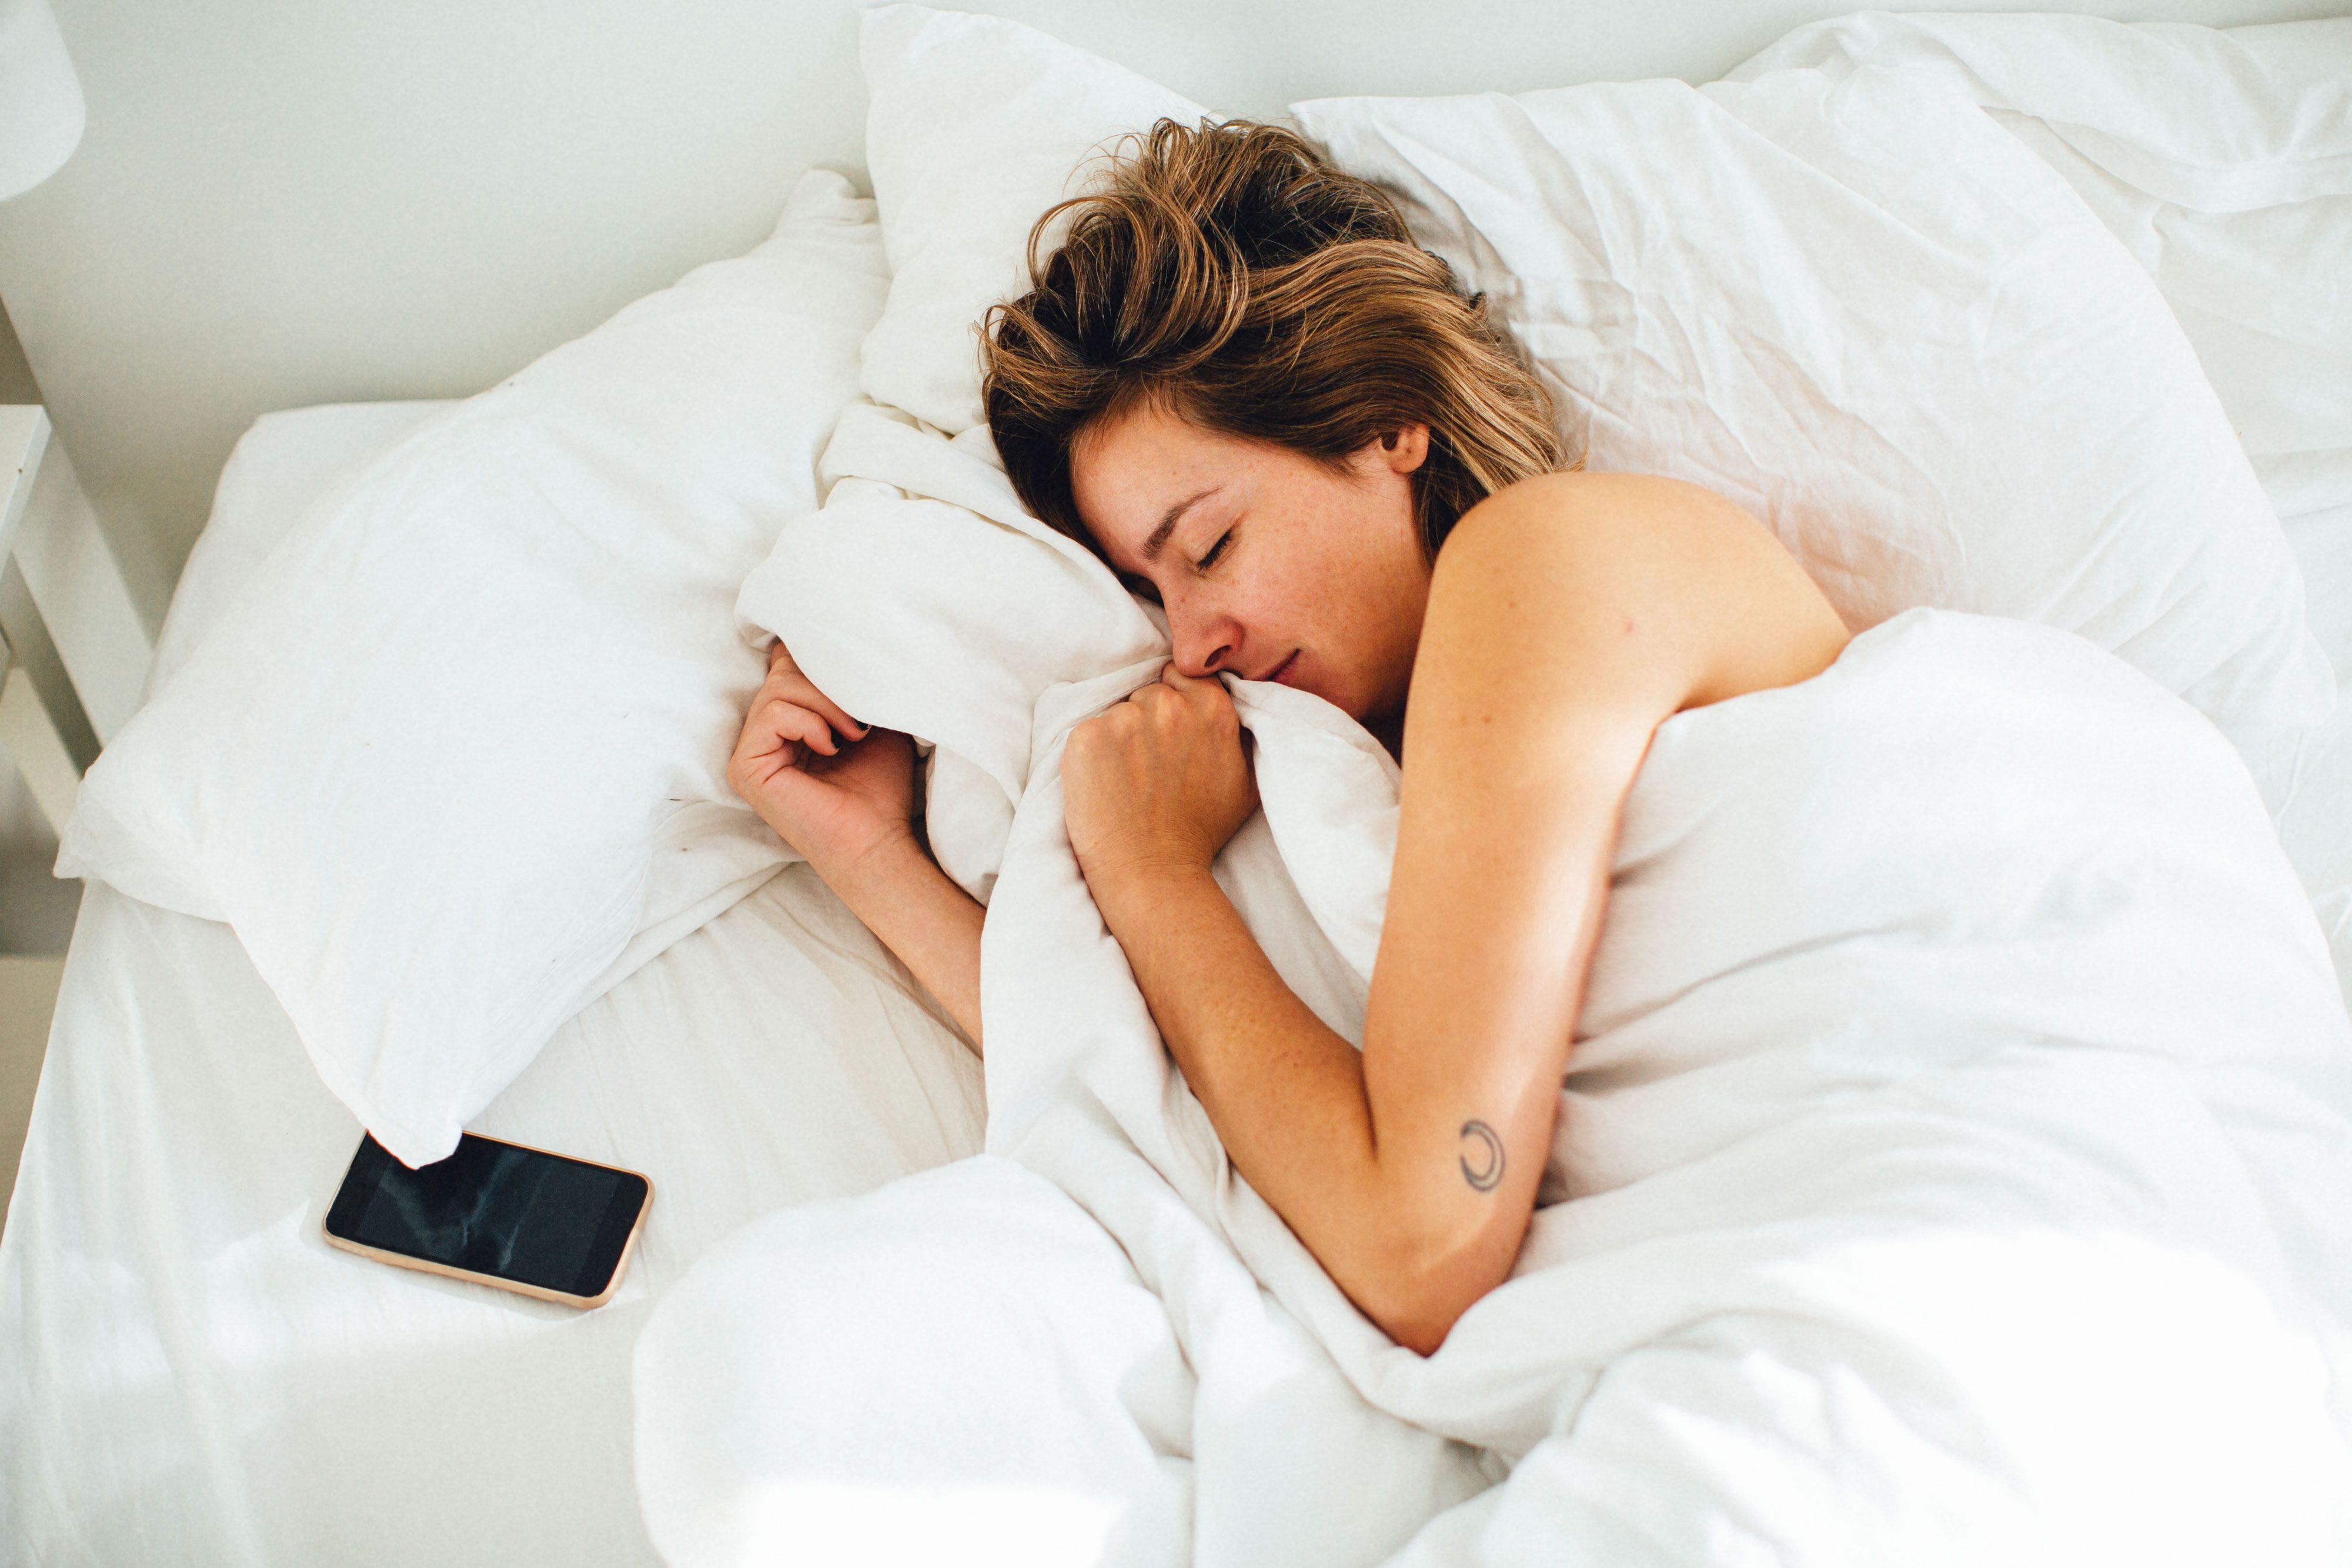 10 Best Sleep Apps Of 2020 For iPhone And Android